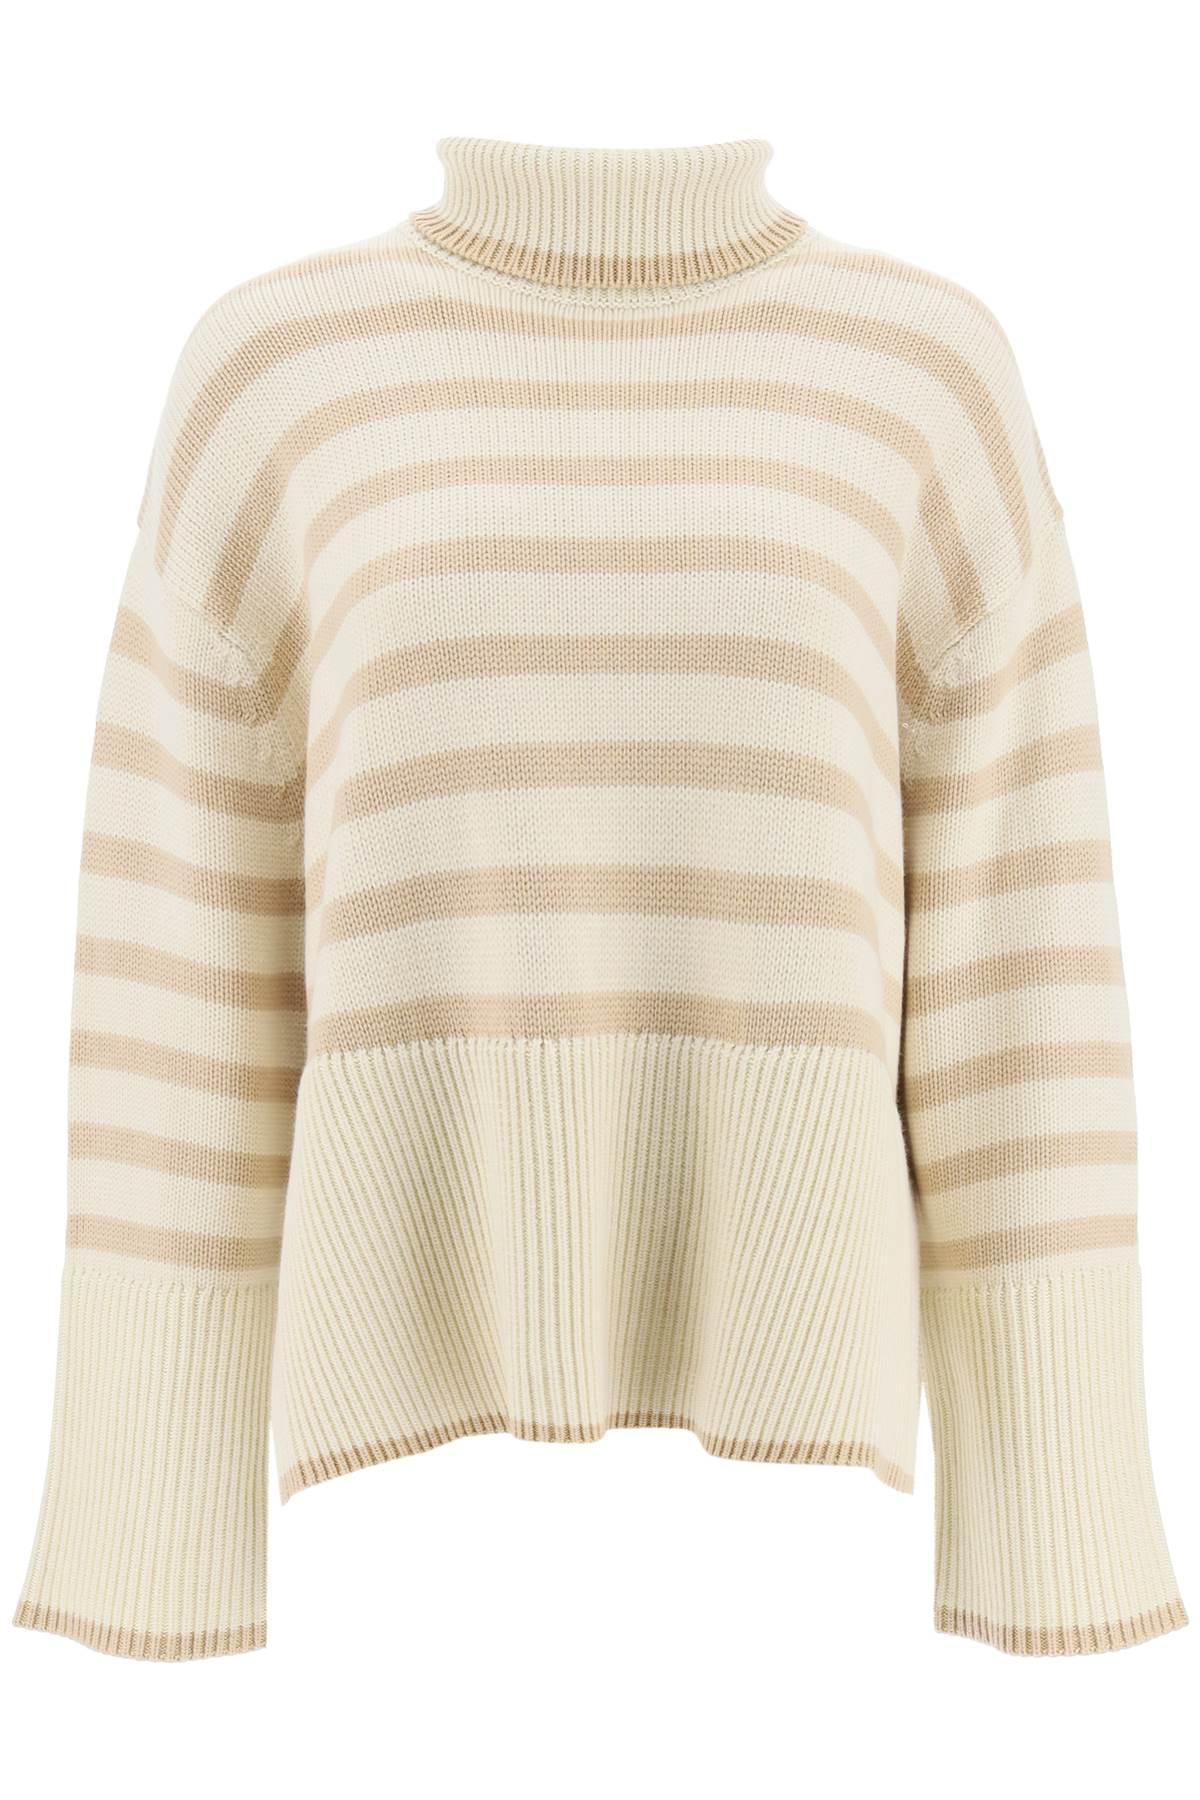 Totême Toteme Oversized Striped Sweater in Natural | Lyst